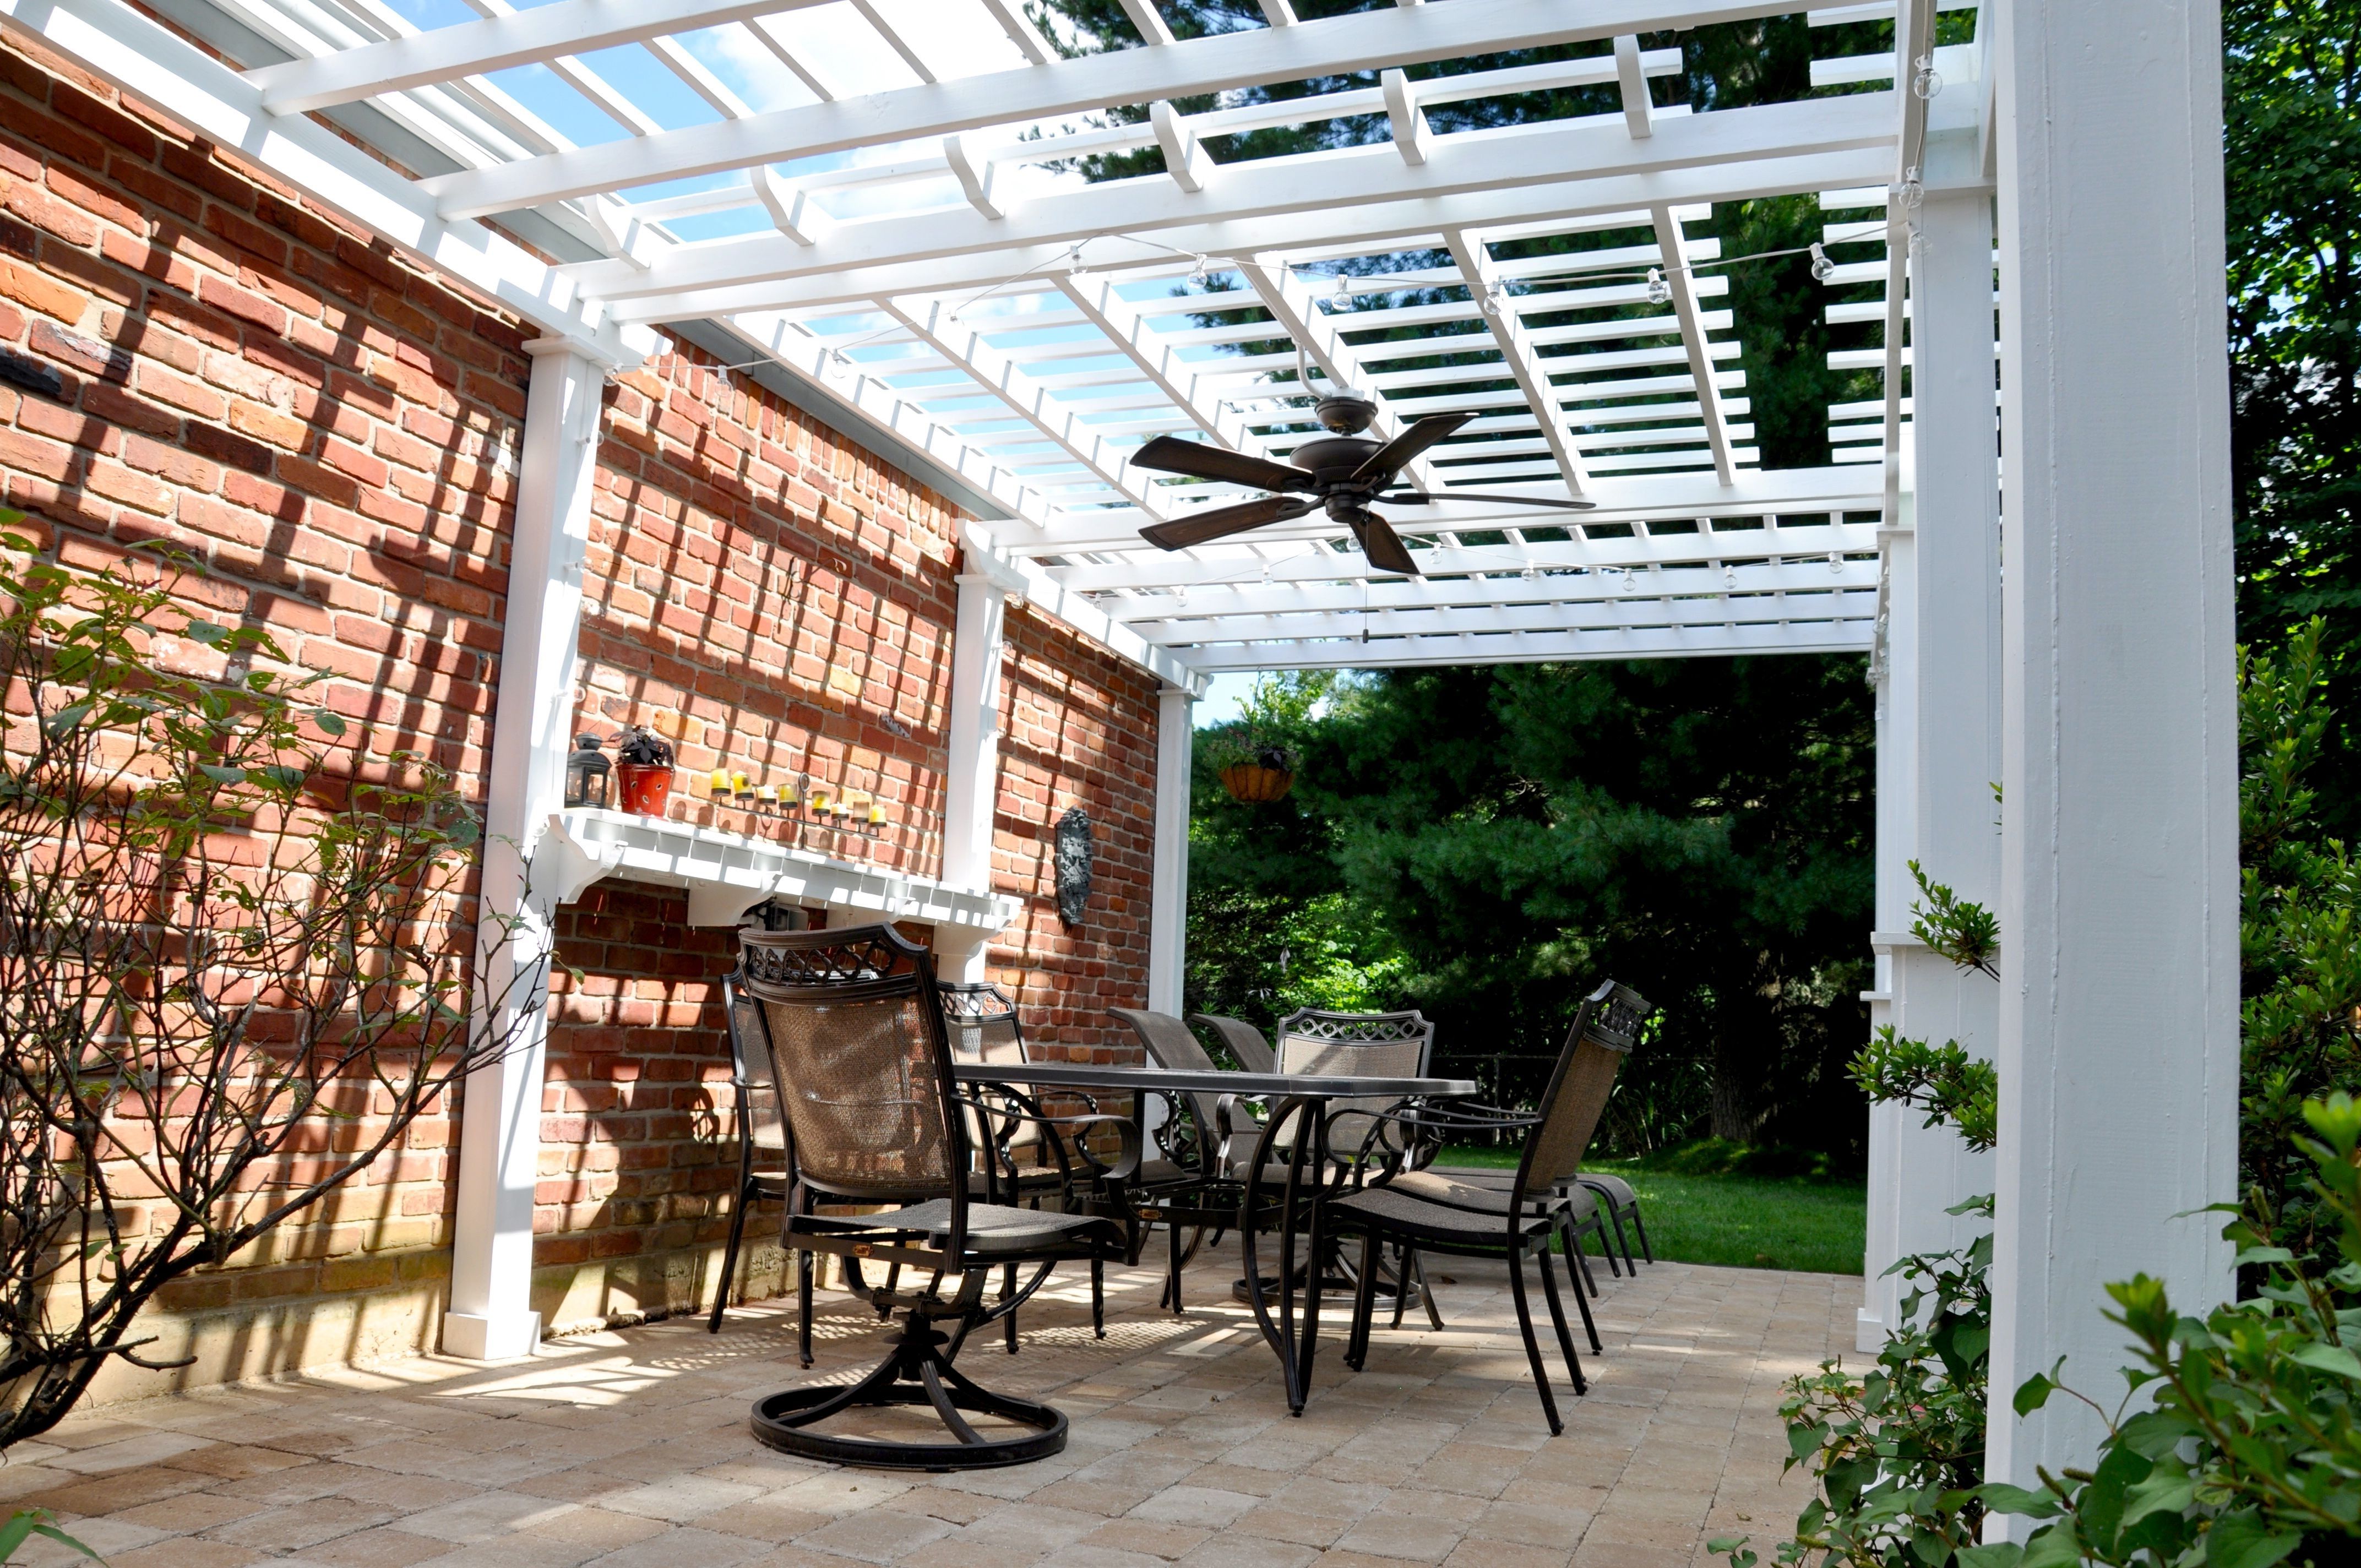 Outdoor Ceiling Fans For Screened Porches In Newest Outdoor Ceiling Fans For Screened Porches (View 1 of 20)